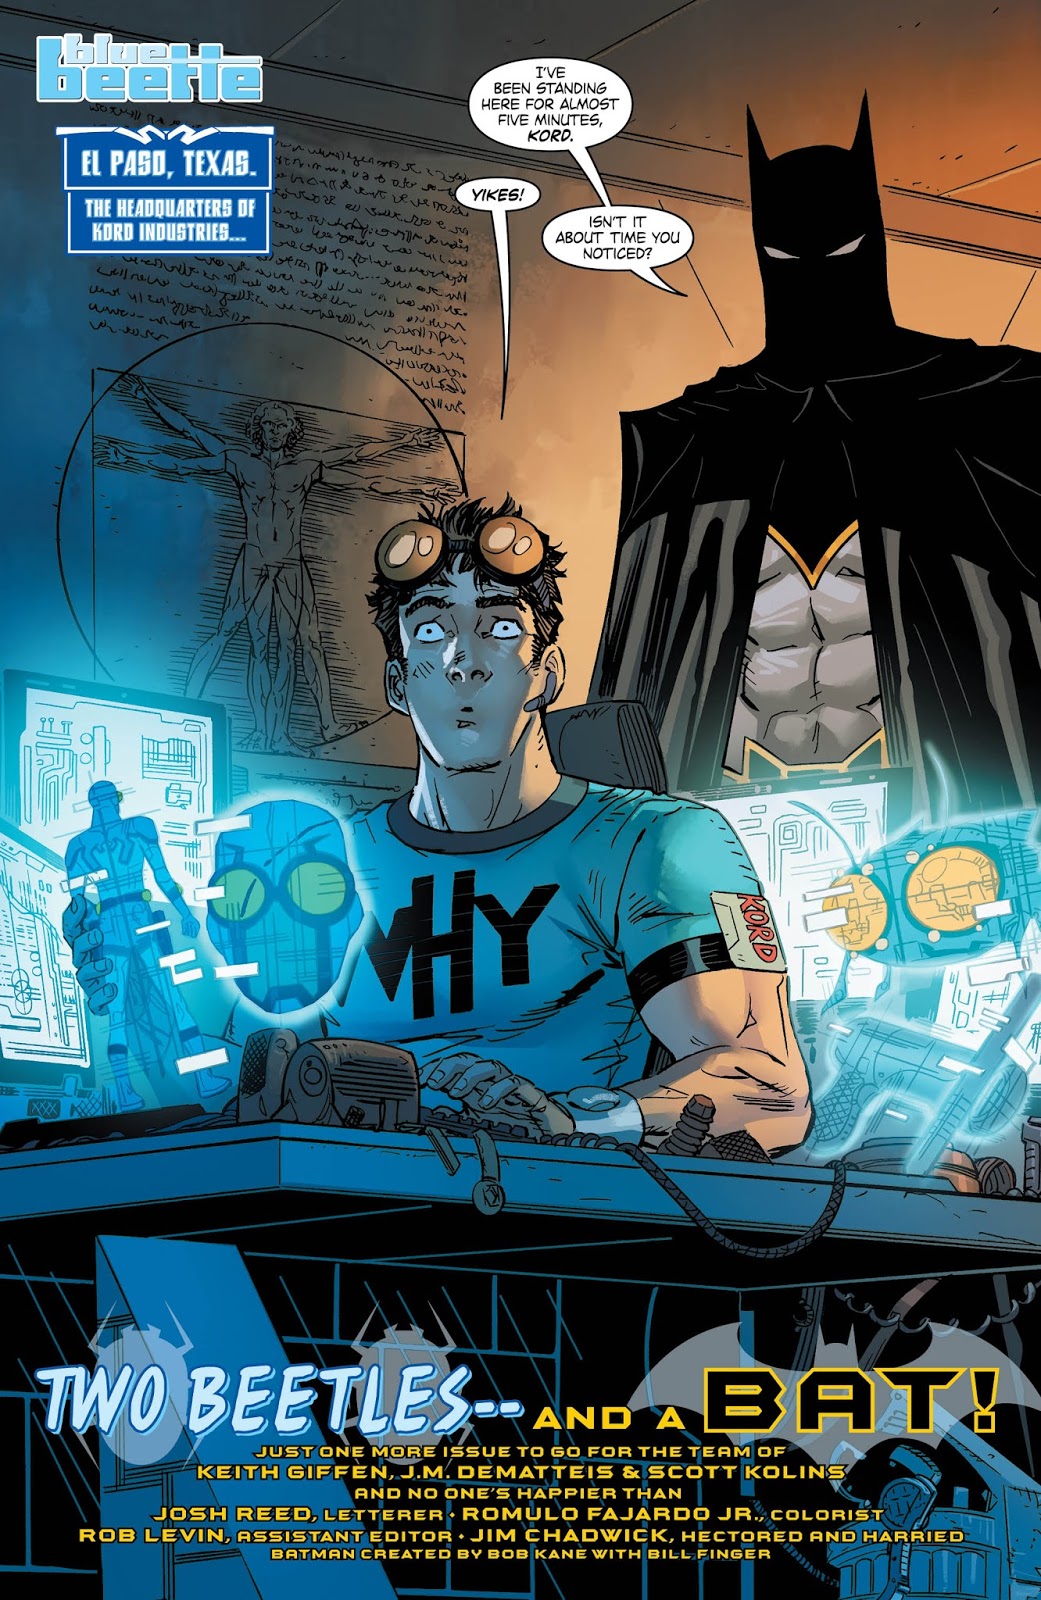 Weird Science DC Comics: Blue Beetle #12 Review and *SPOILERS*